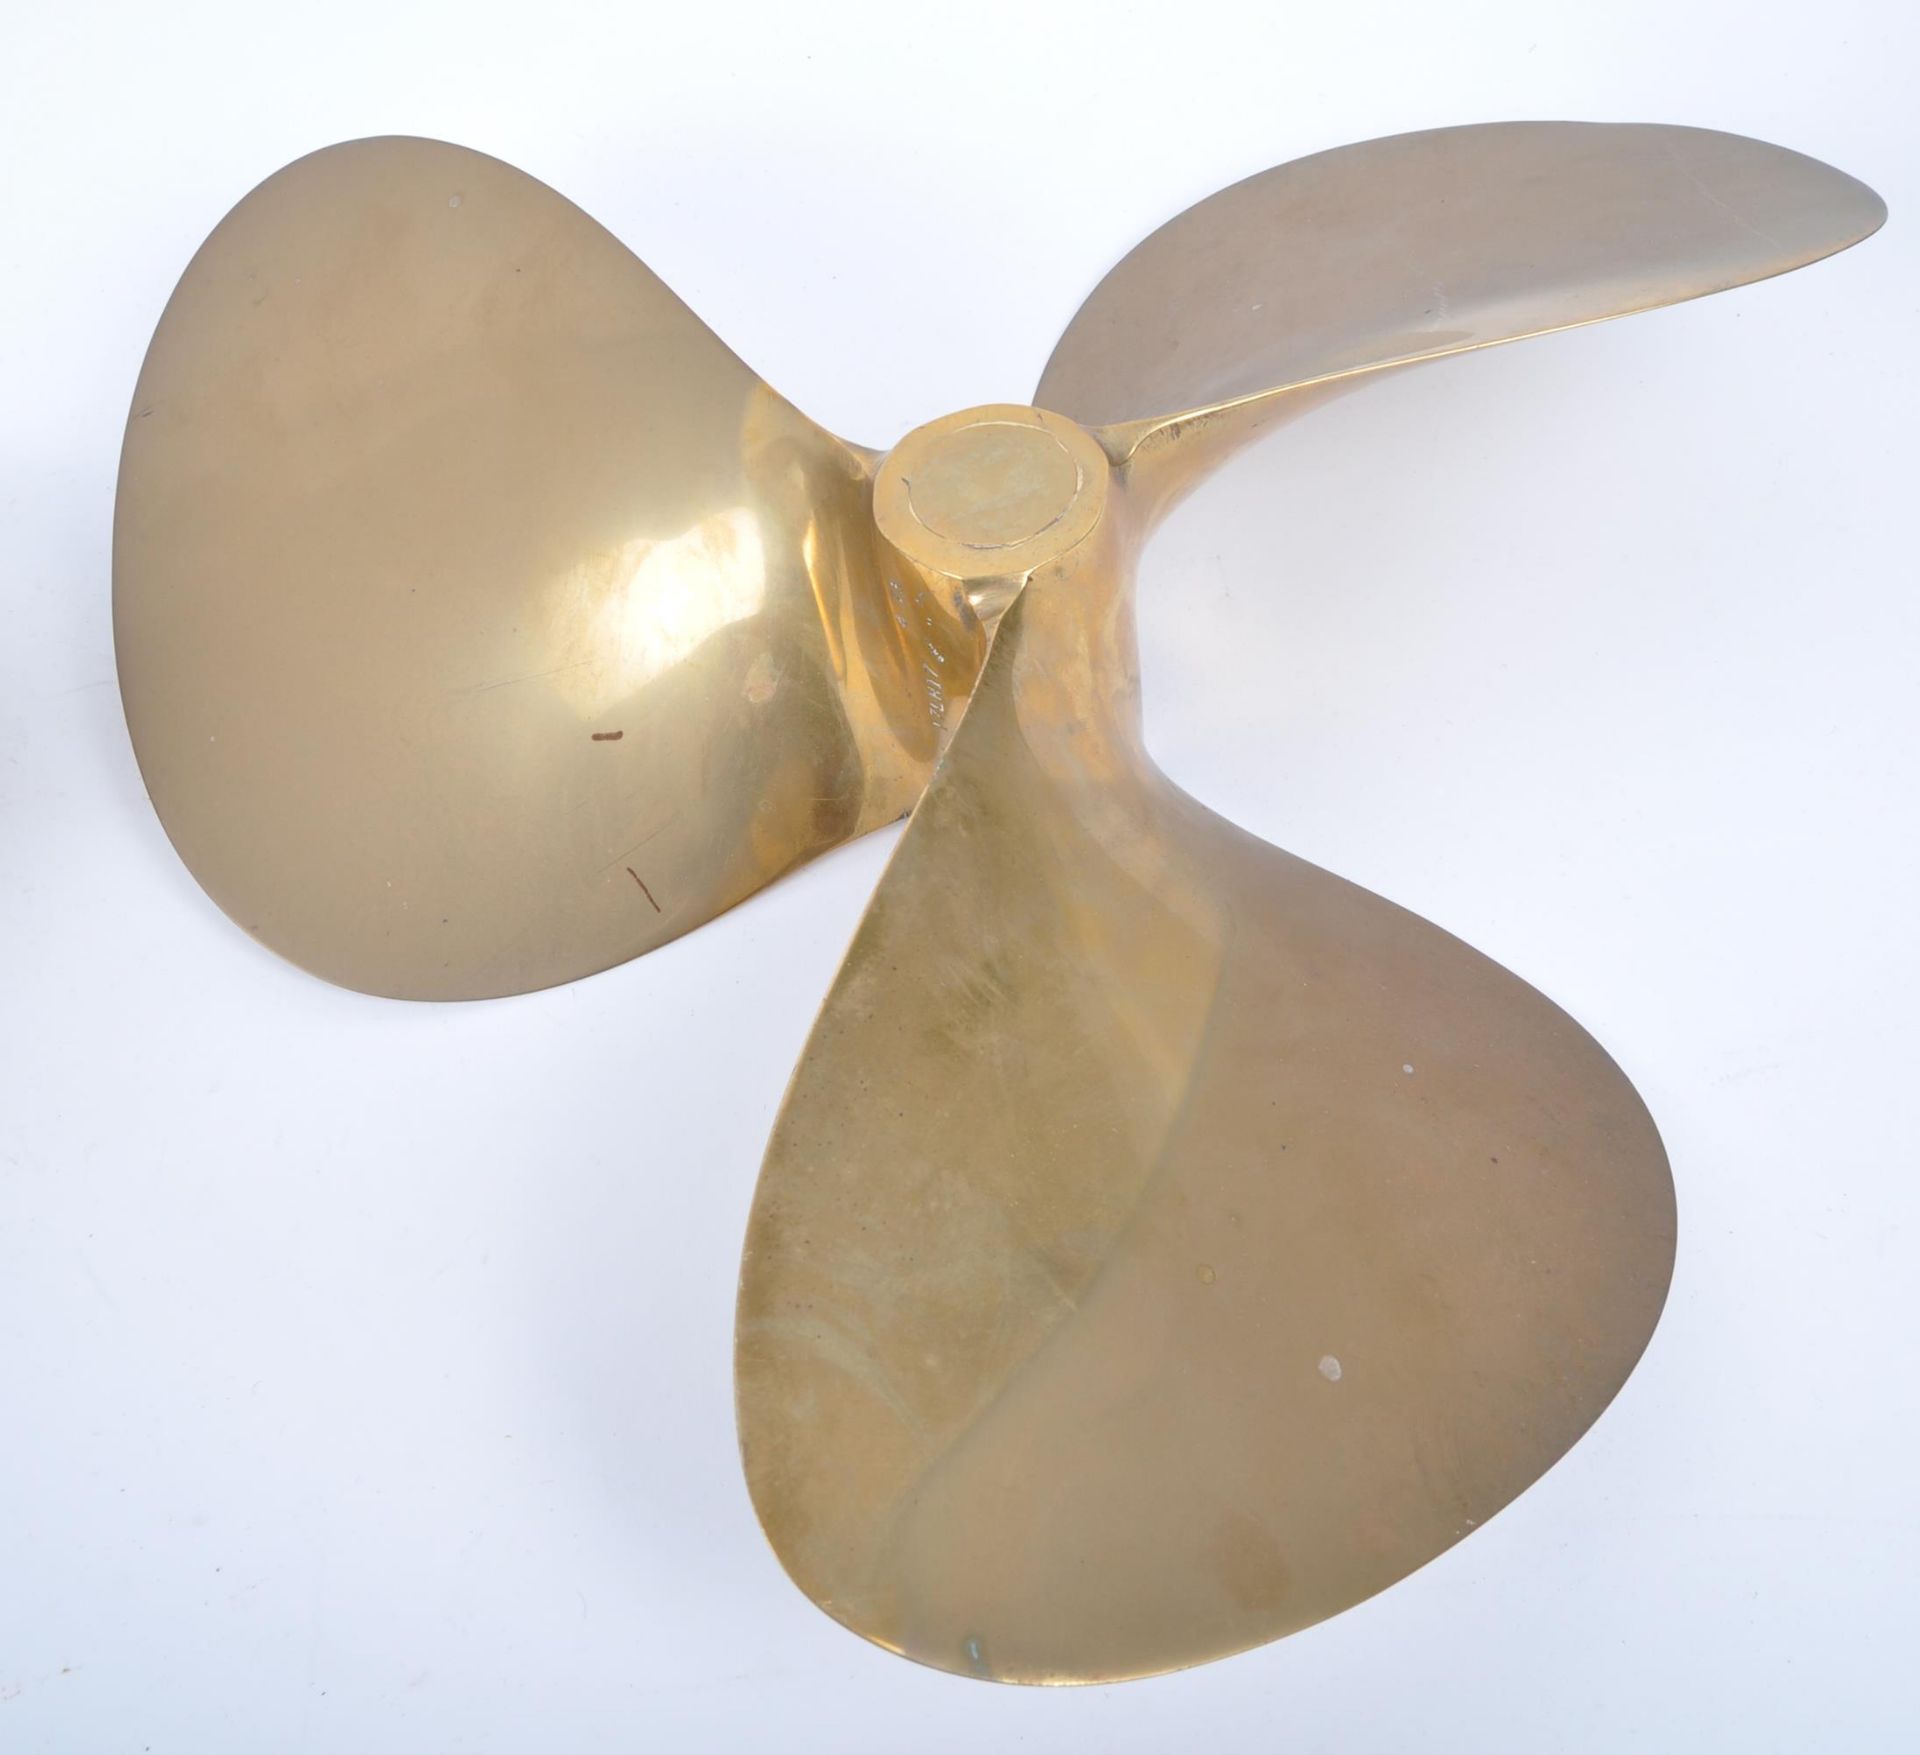 PAIR OF 20TH CENTURY SOLID BRONZE SHIP'S PROPELLERS - Image 6 of 7